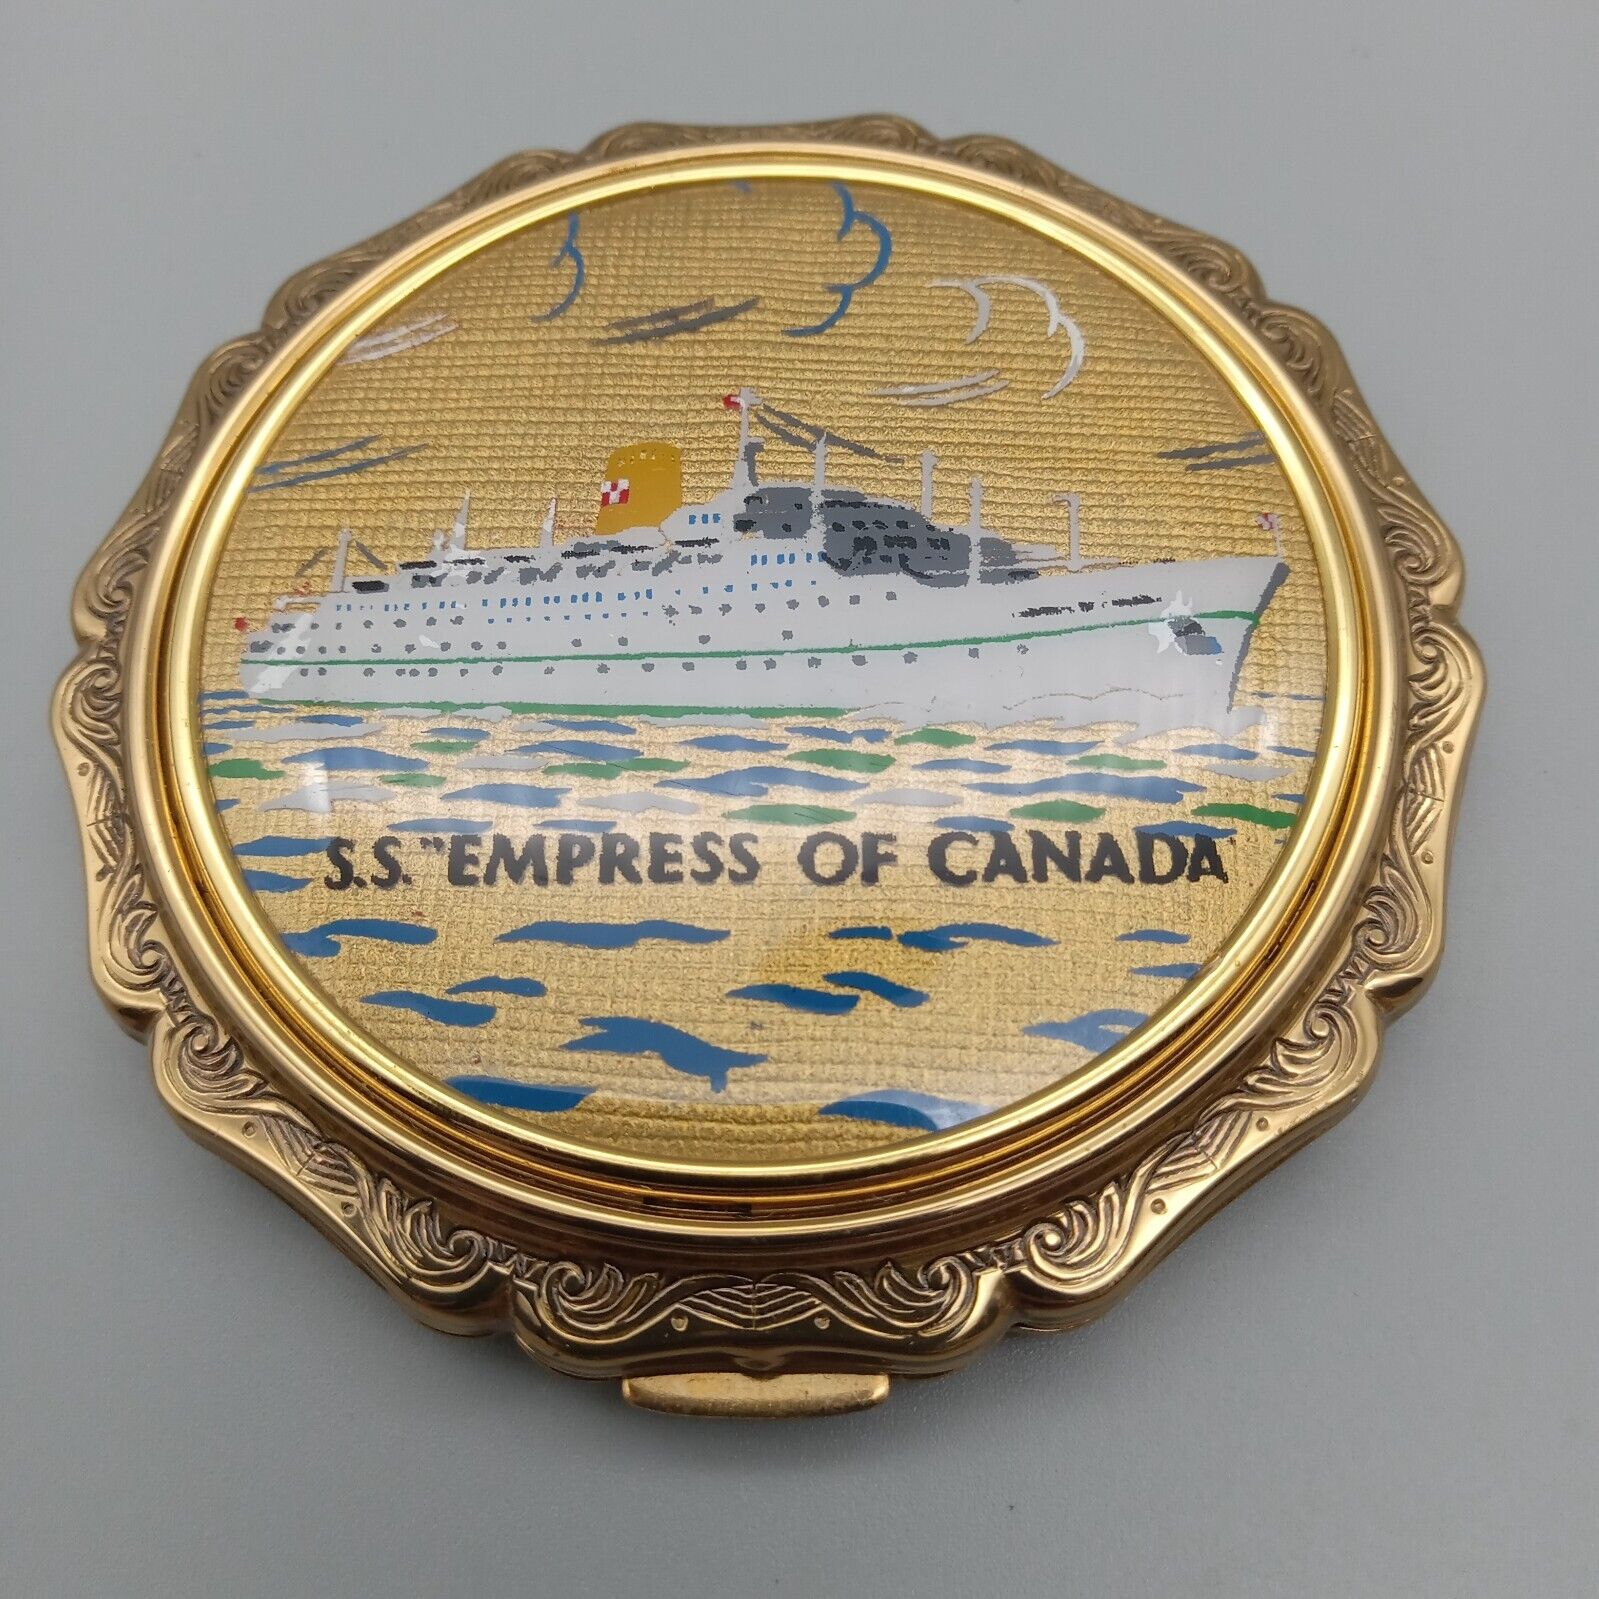 SS EMPRESS OF CANADA Canadian Pacific Line STRATTON Ship Portrait Compact 2.75\